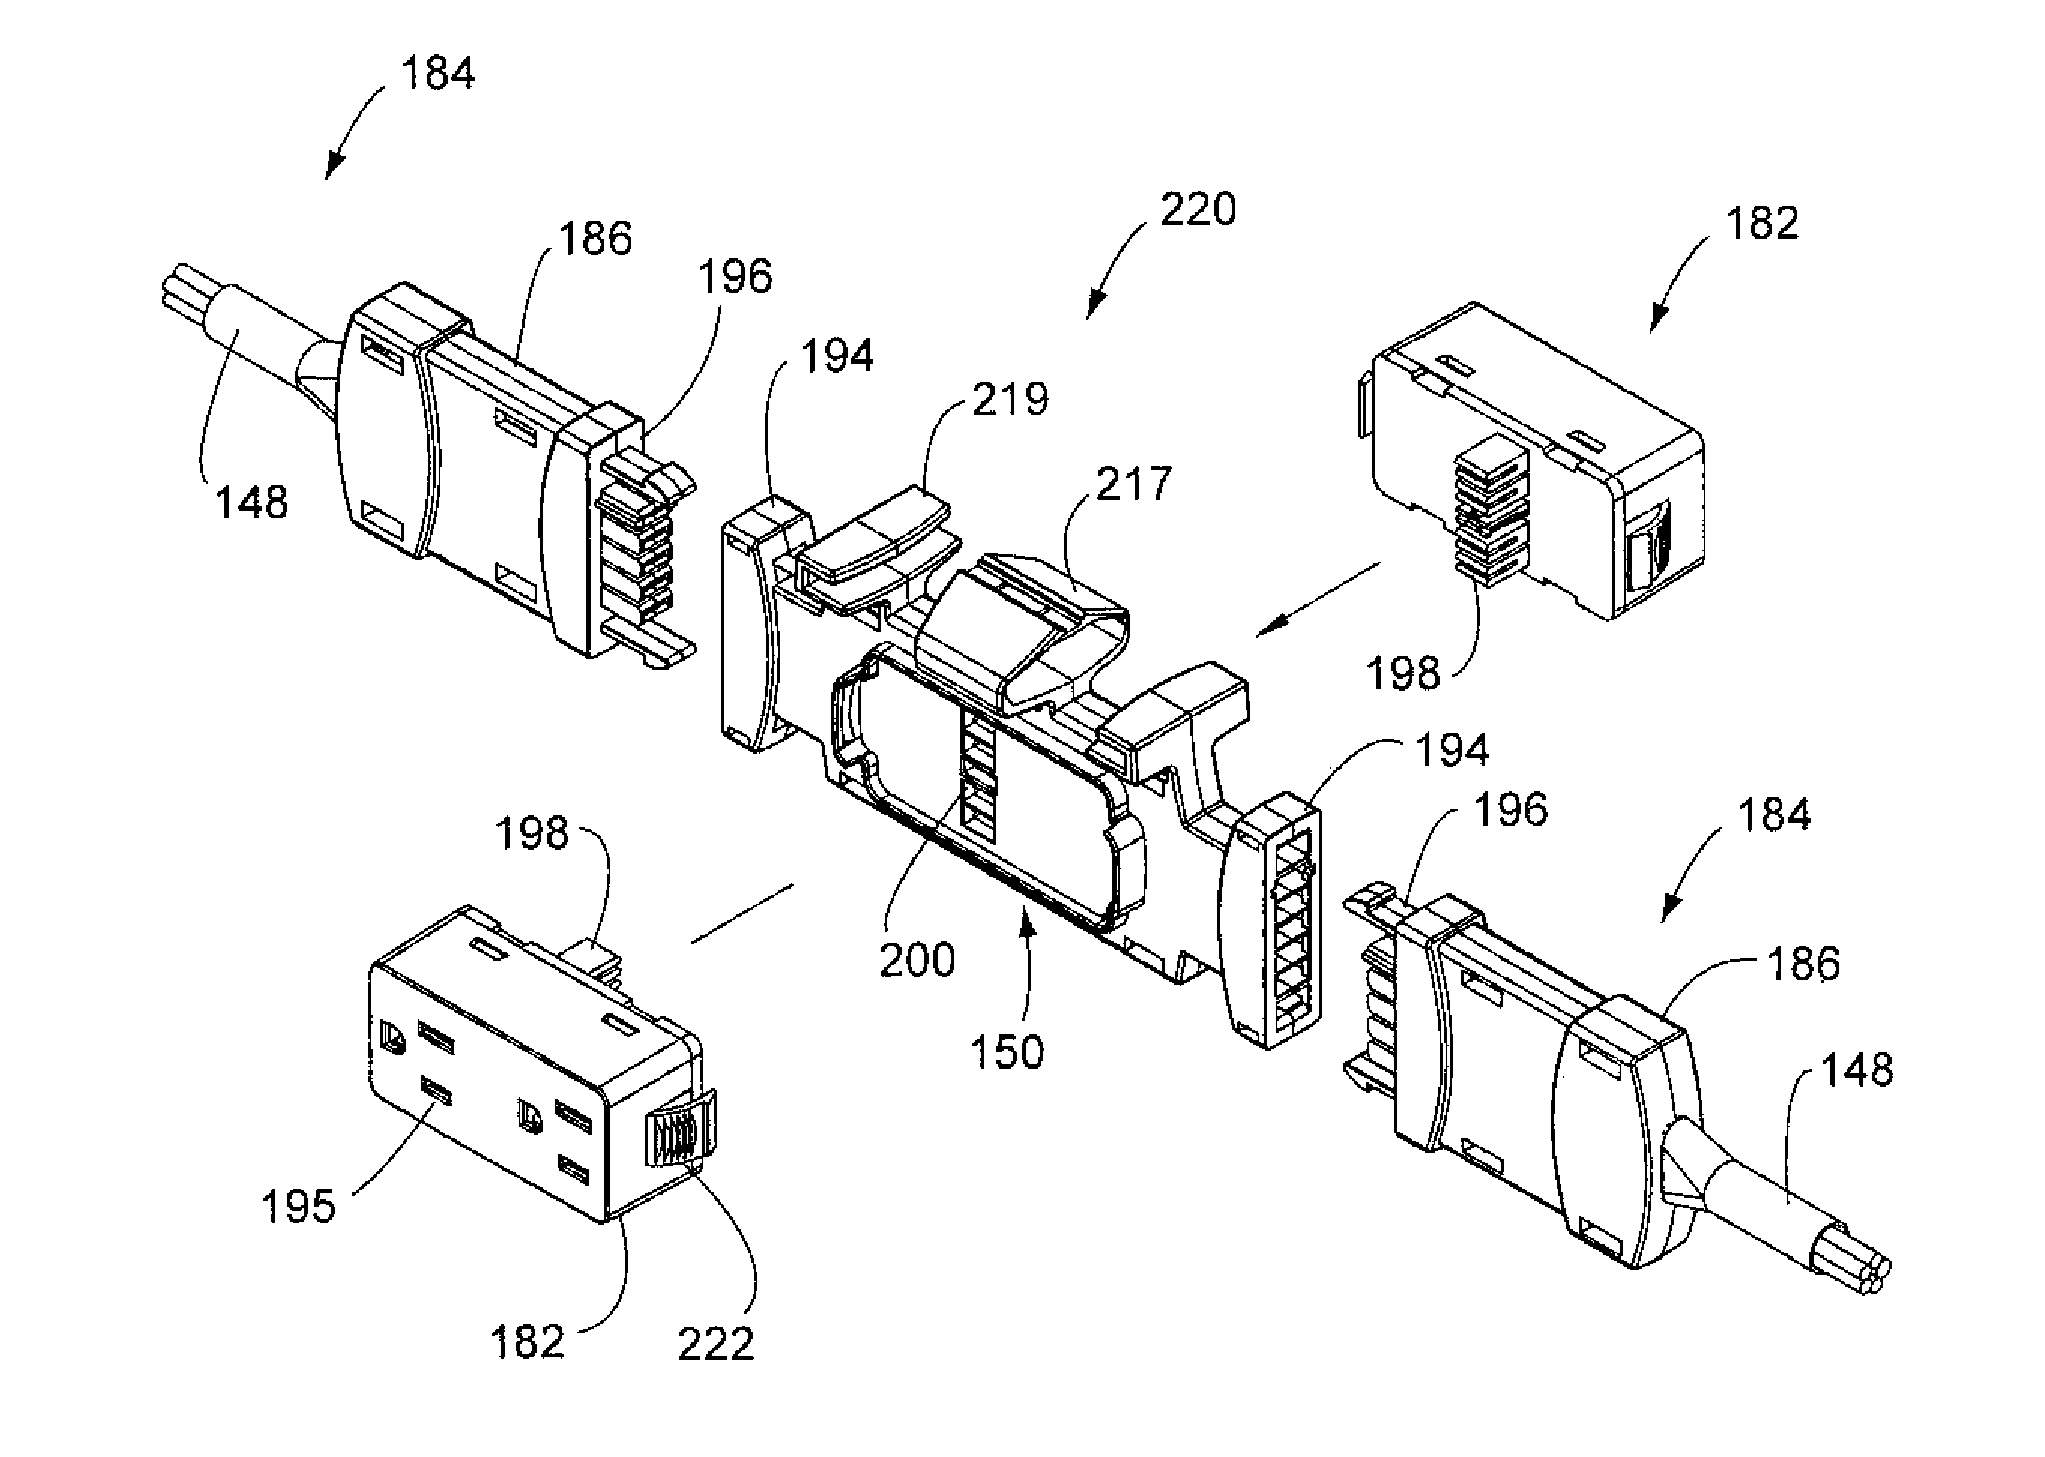 Modular power distribution assembly with multiple circuits